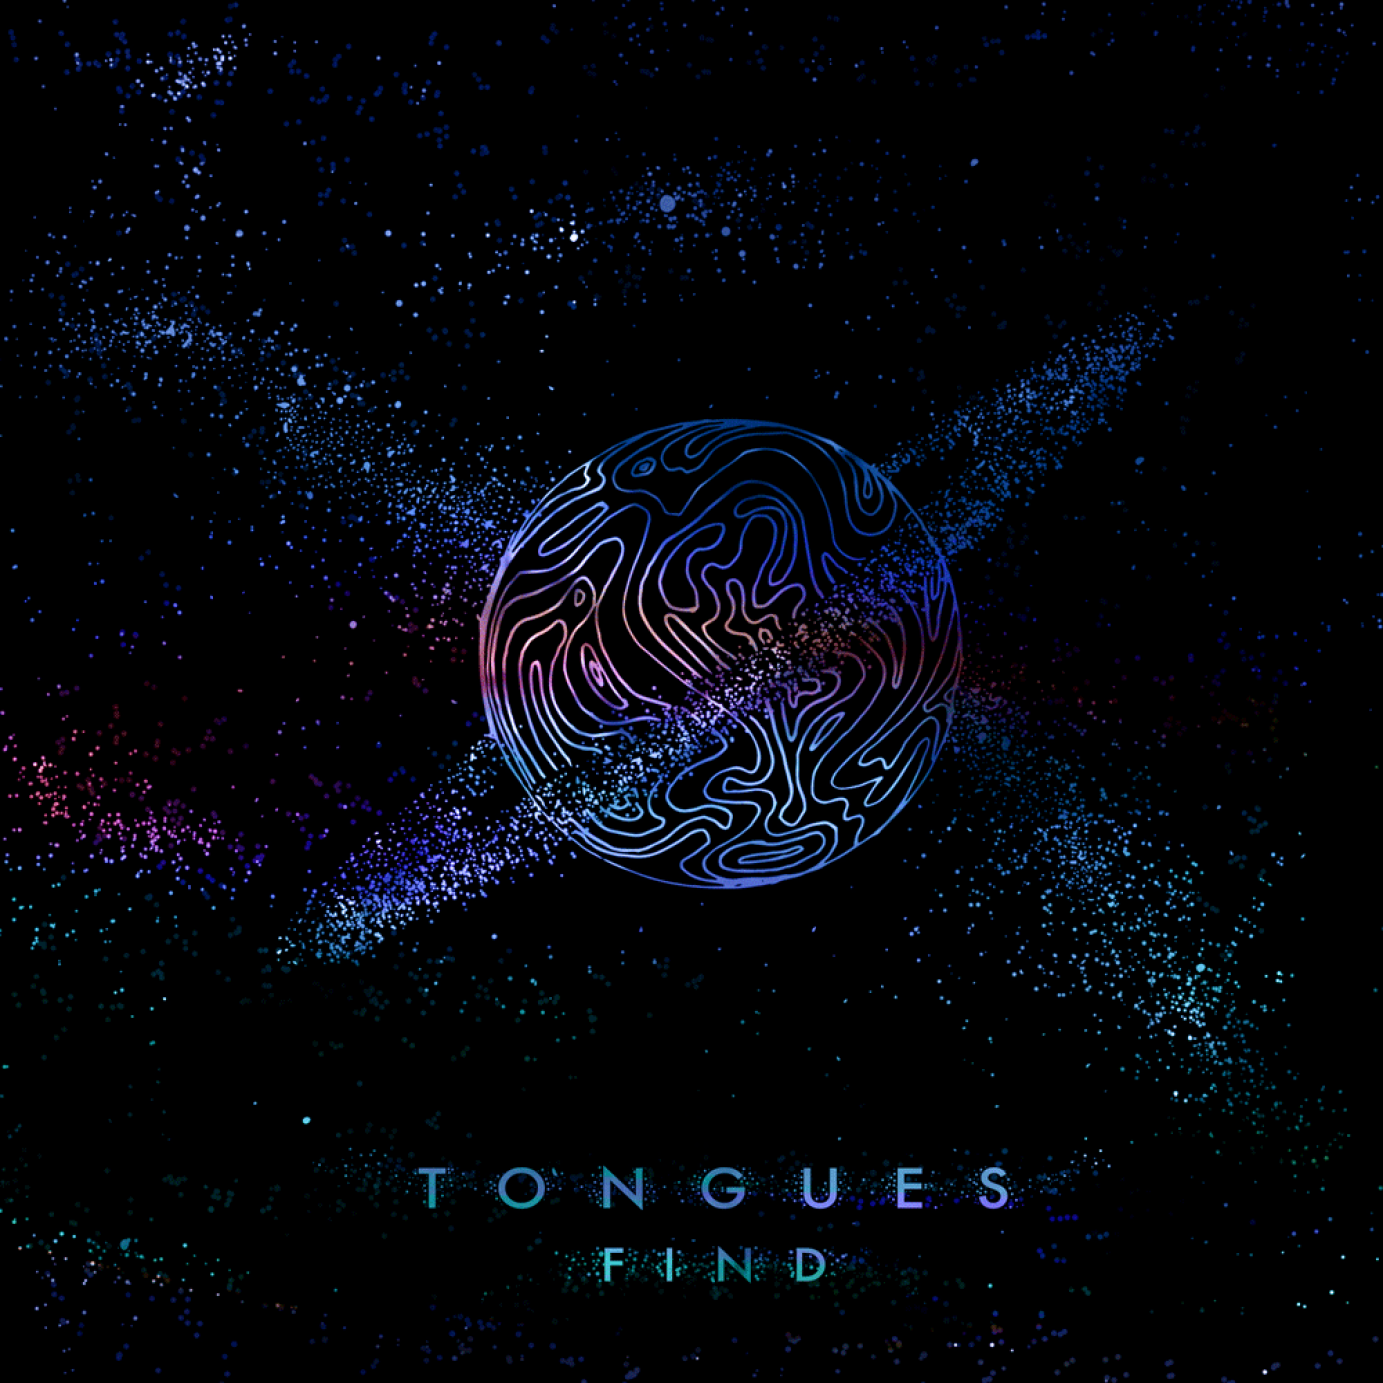 Artwork for Tongues. by helenlucy